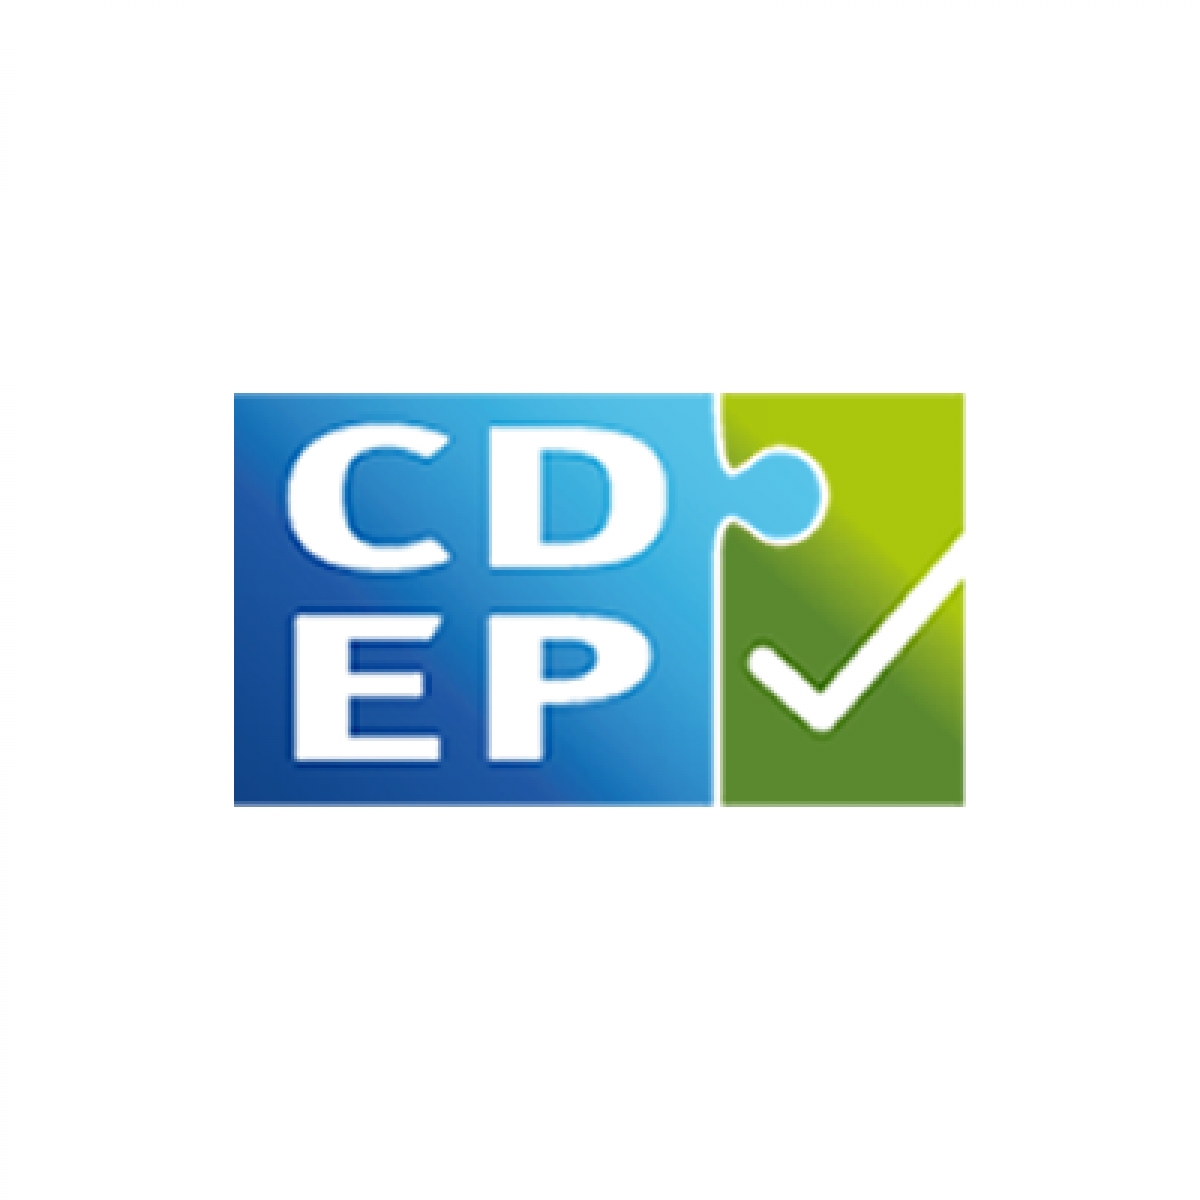 CDEP Is Being Used Across 34 Percent Of CCGs In The UK